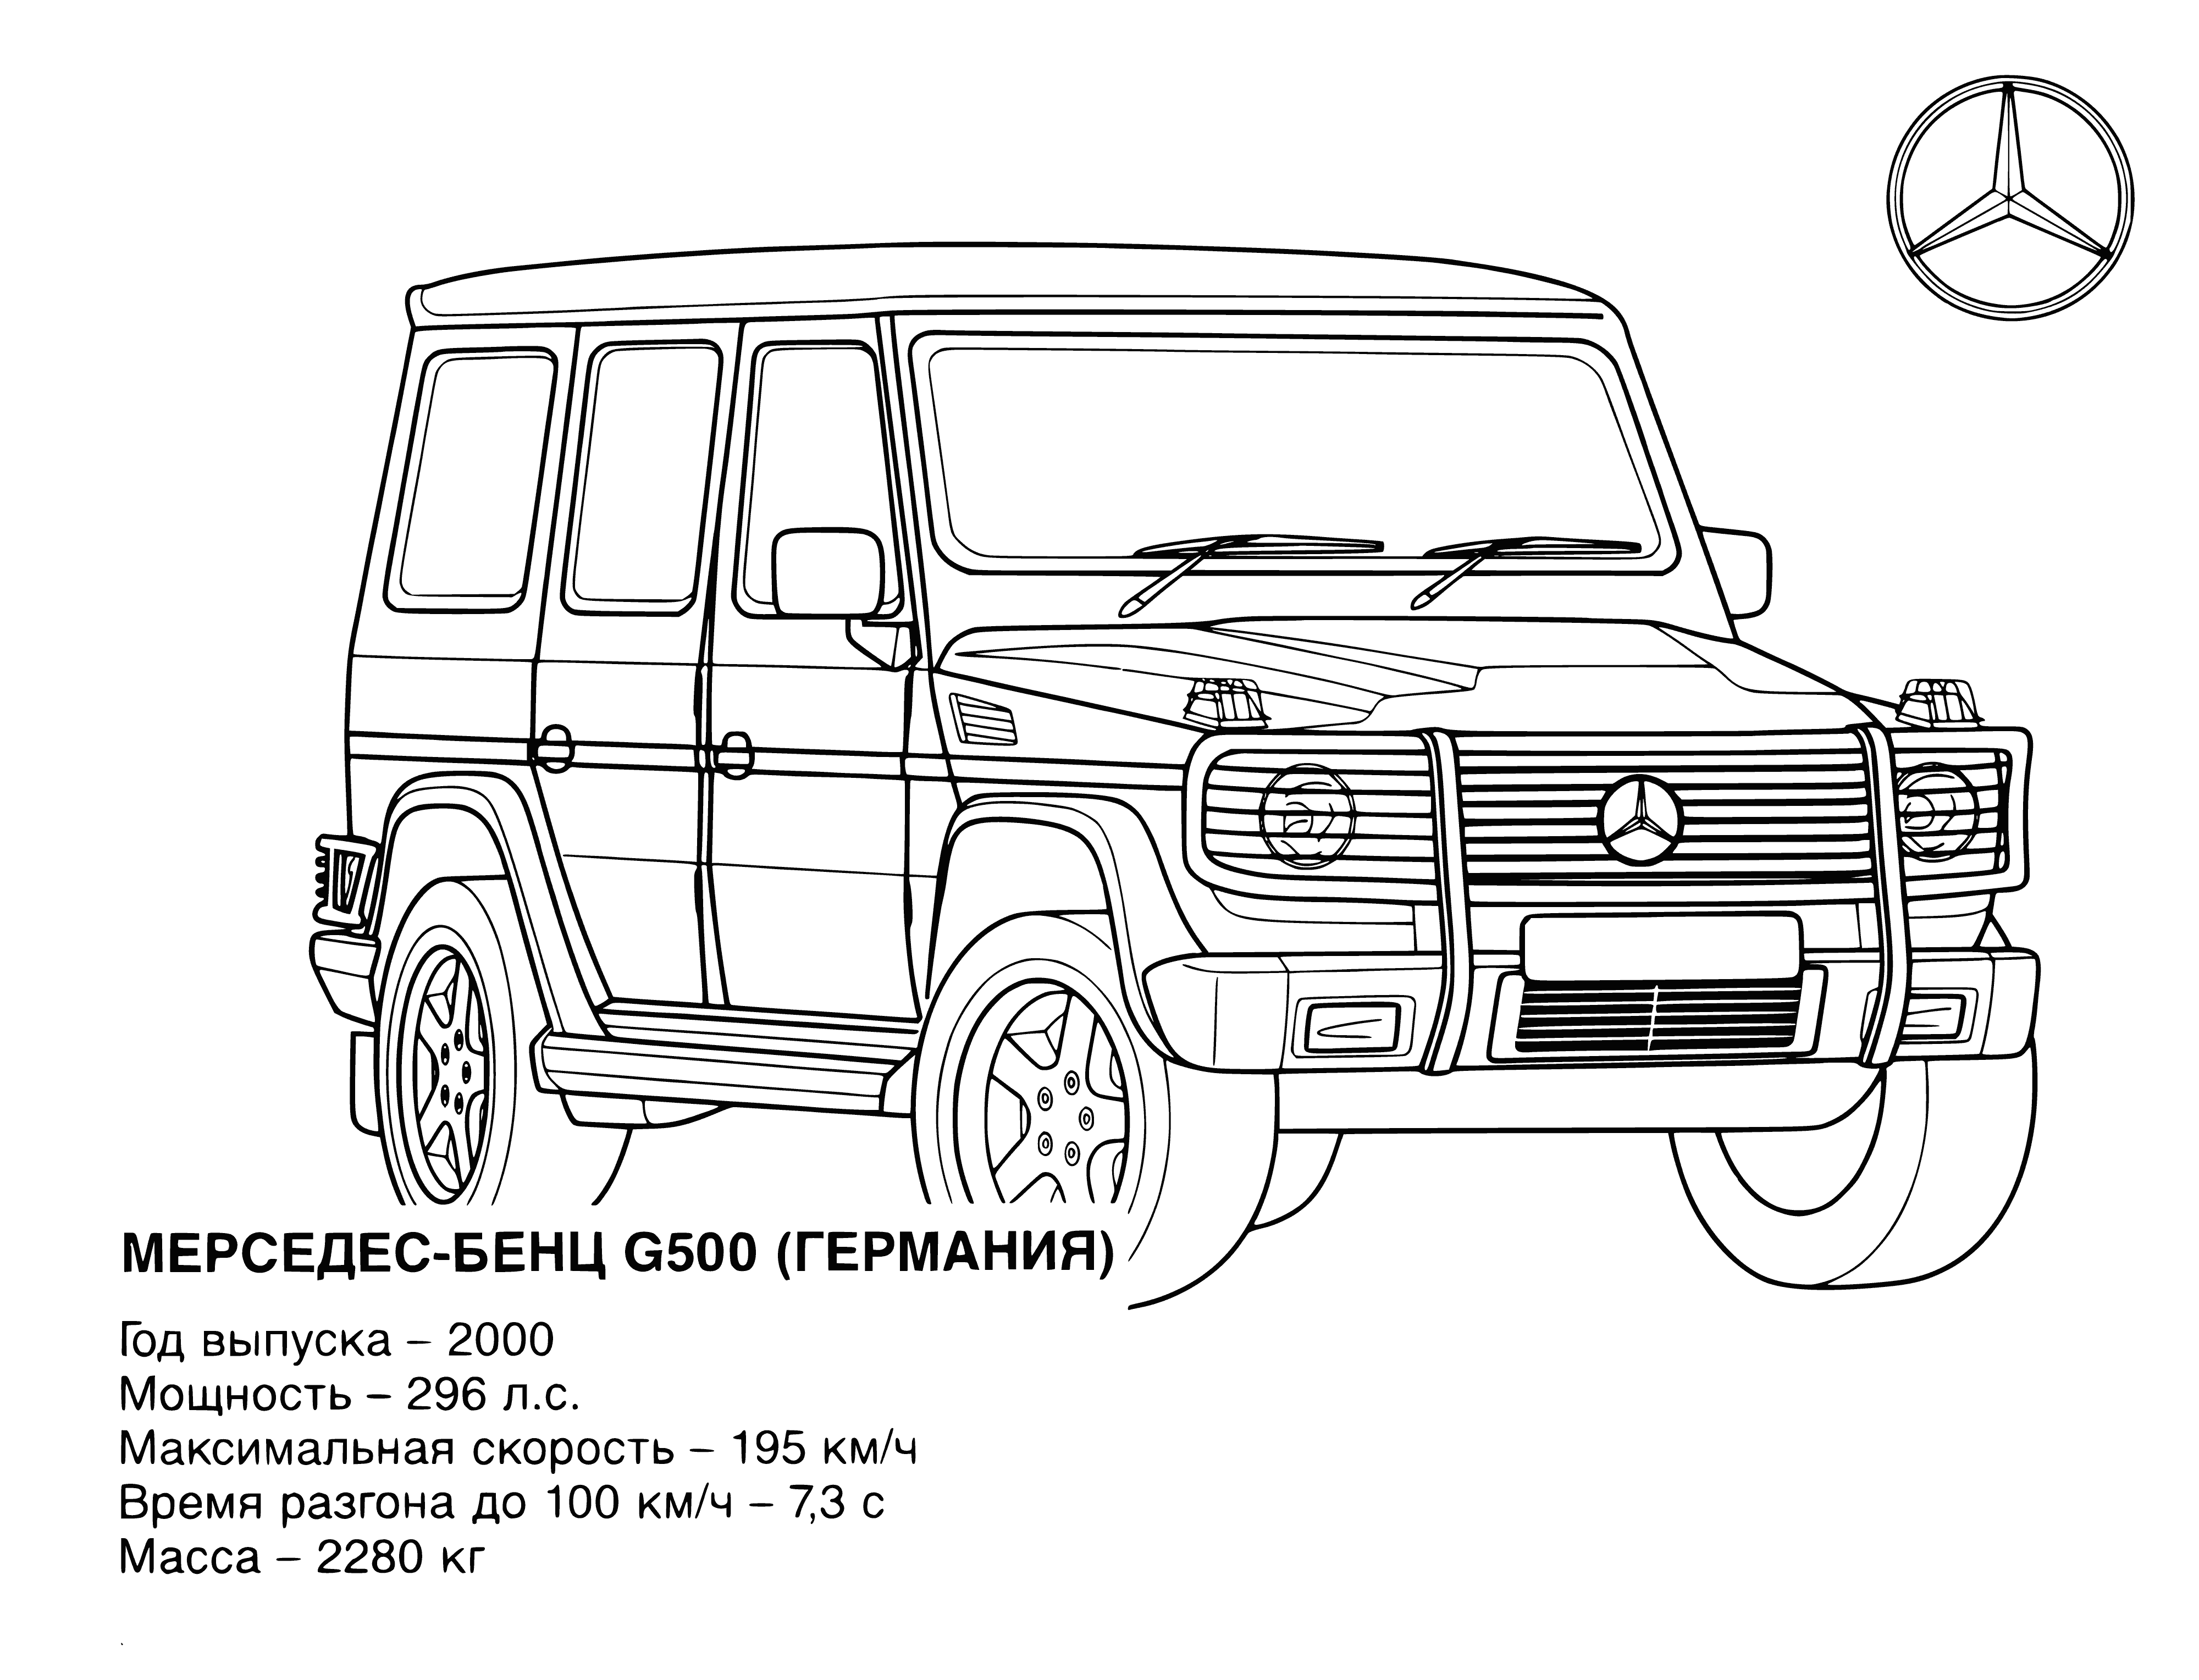 coloring page: #JeepLove

Two green jeeps, same model, stand side-by-side - it's time to color! #JeepLove